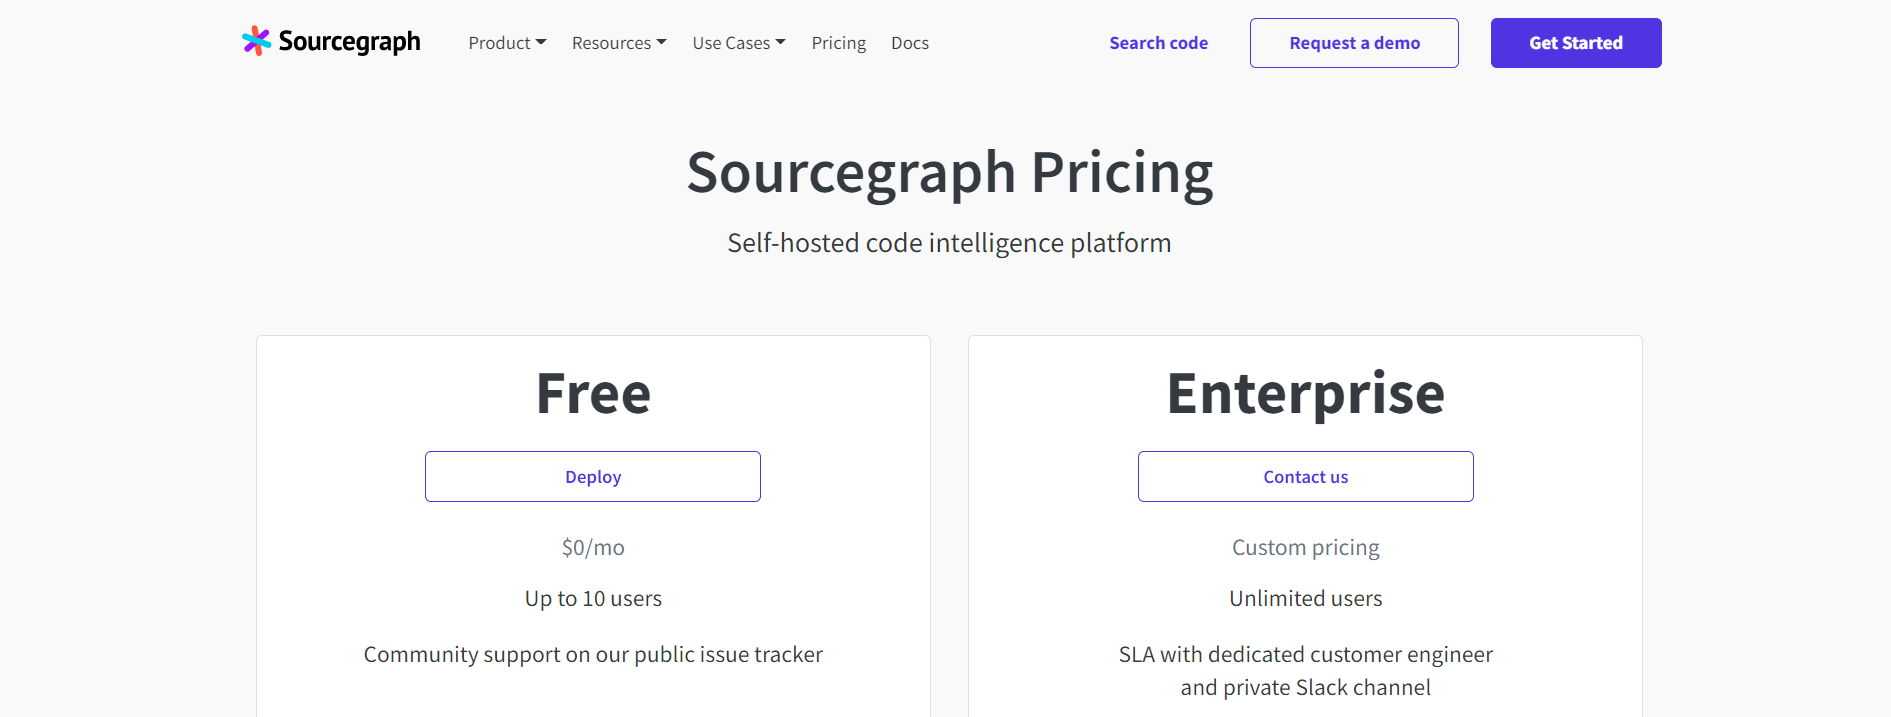 Sourcegraph Pricing